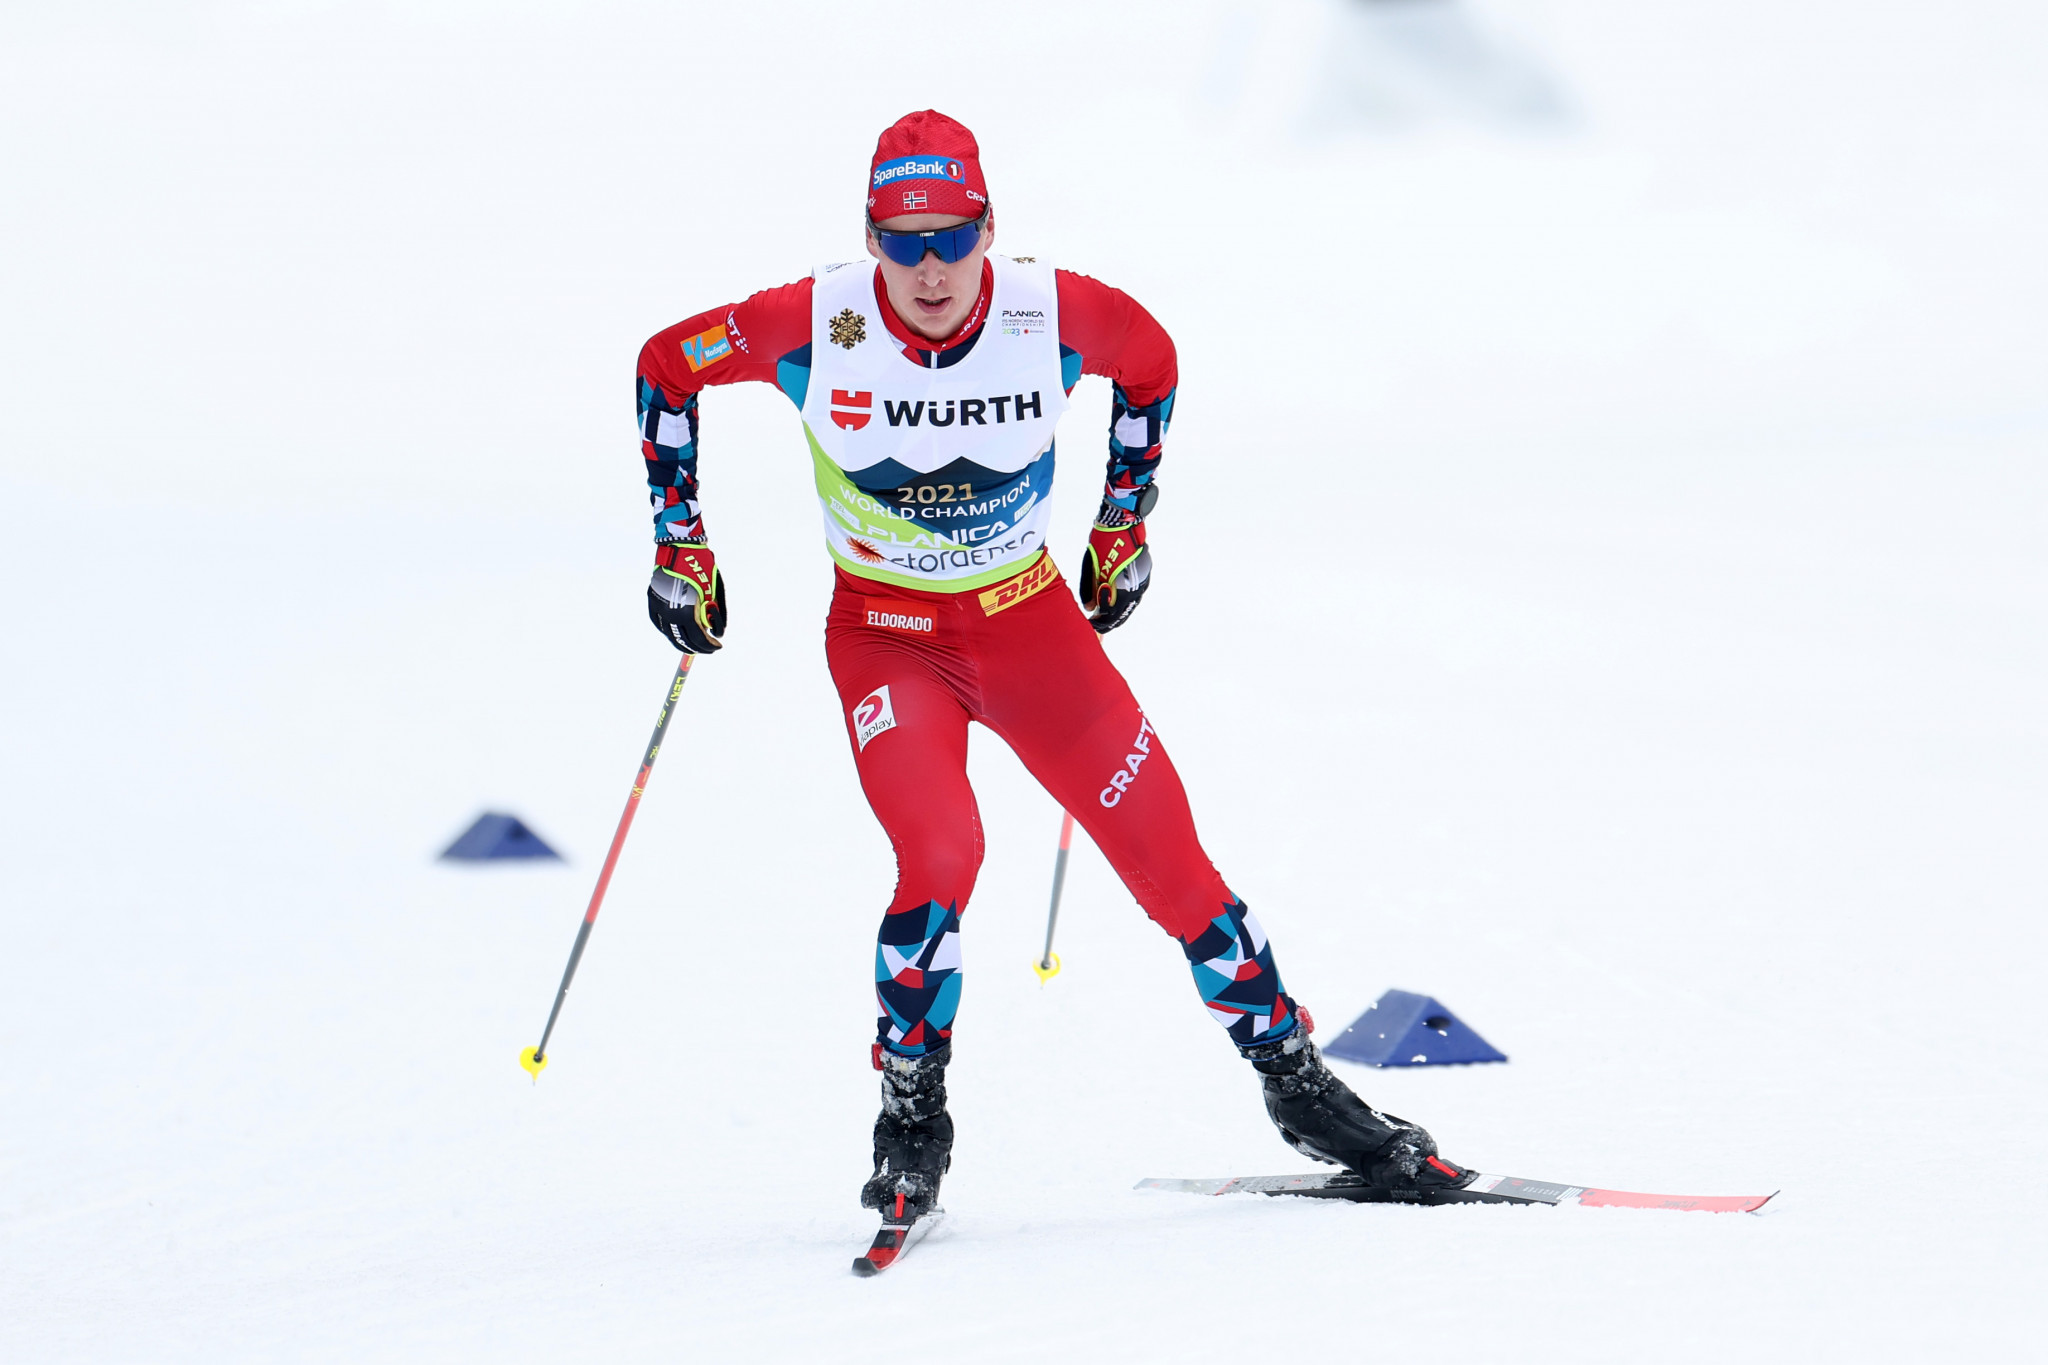 Norway's Simen Hegstad Krüger earned a home FIS Cross-Country World Cup victory in the men's 50km mass start freestyle in Oslo ©Getty Images